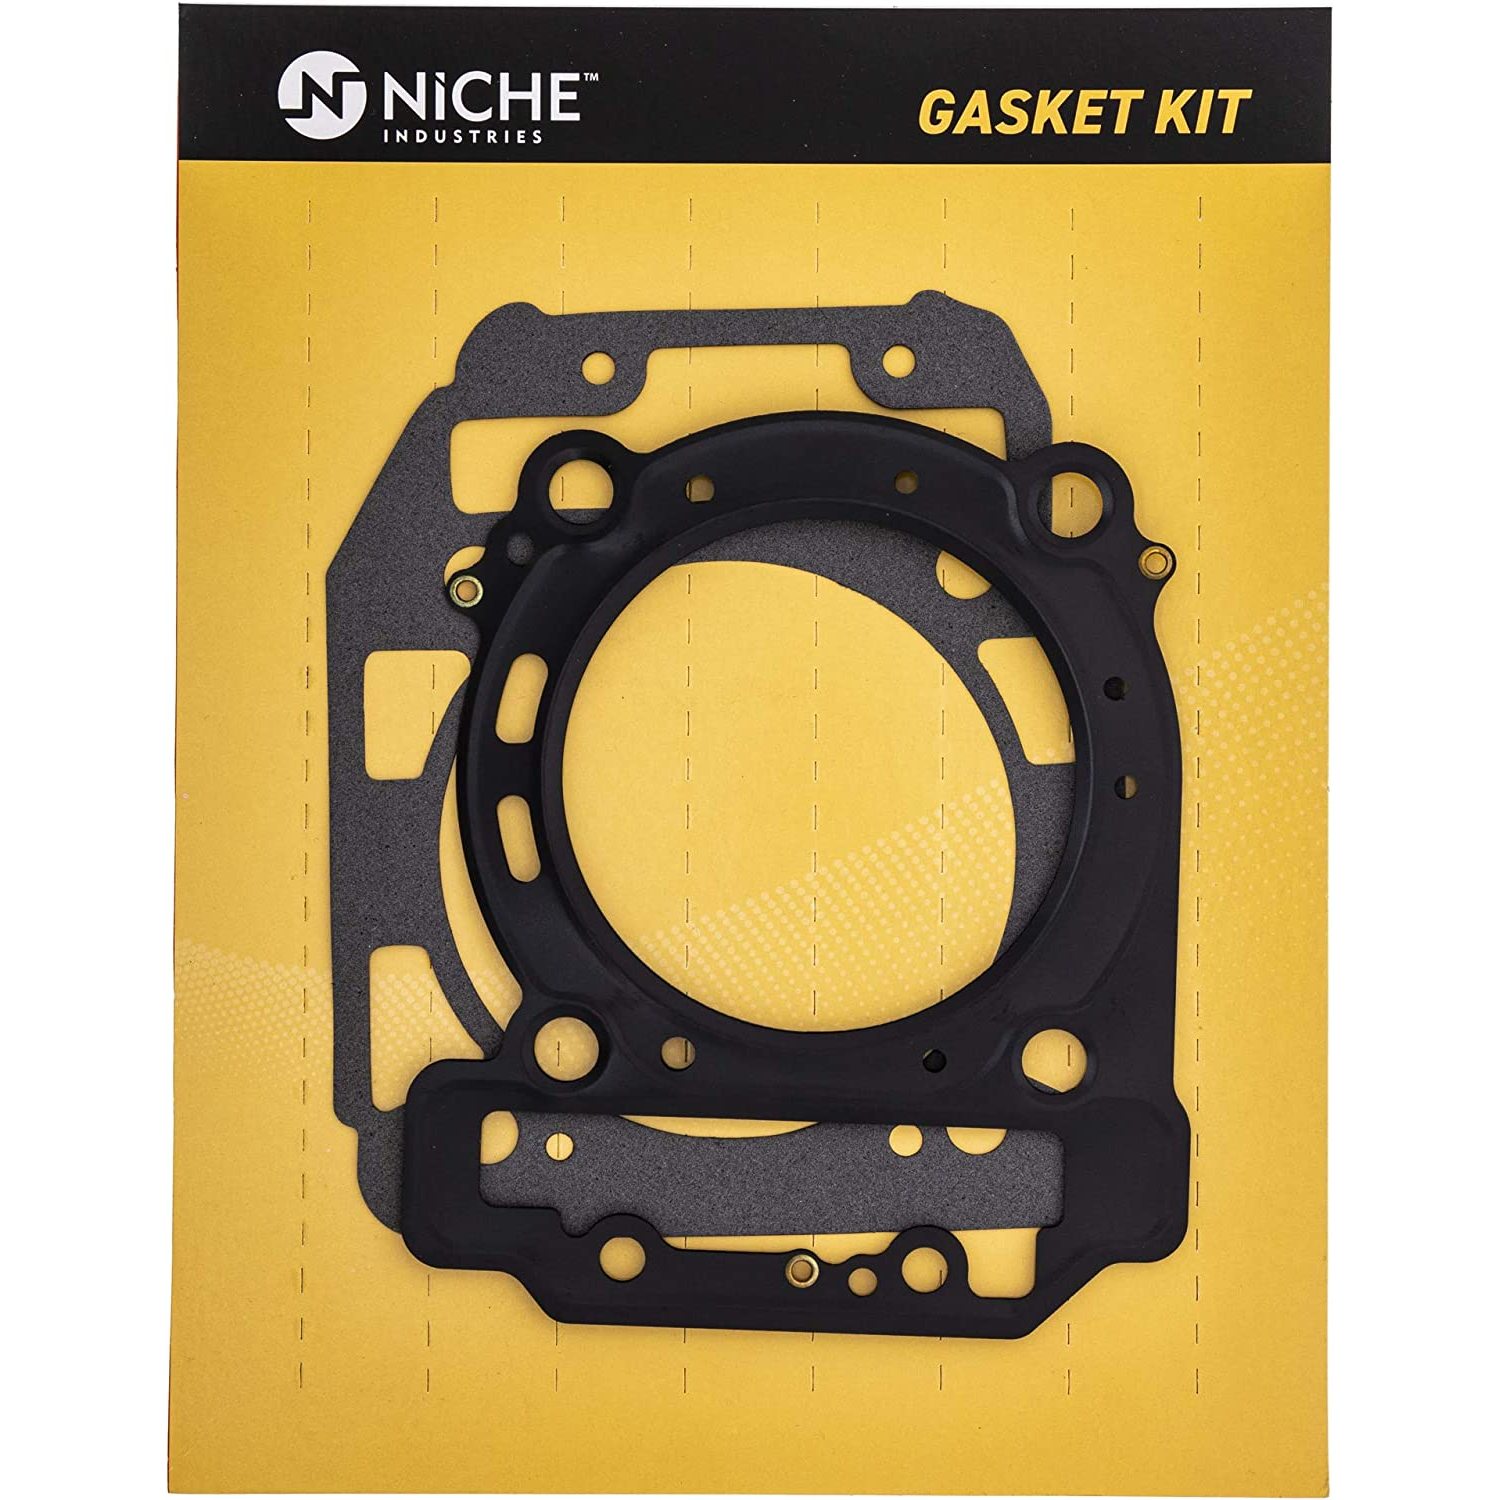 NICHE Cylinder Head and Base Gasket Kit Set Combo For 2003-2017 Ski-Doo Renegade Can-Am Commander 420630195 420630850, Base Gasket Replaces OEM Part Numbe... - image 1 of 4